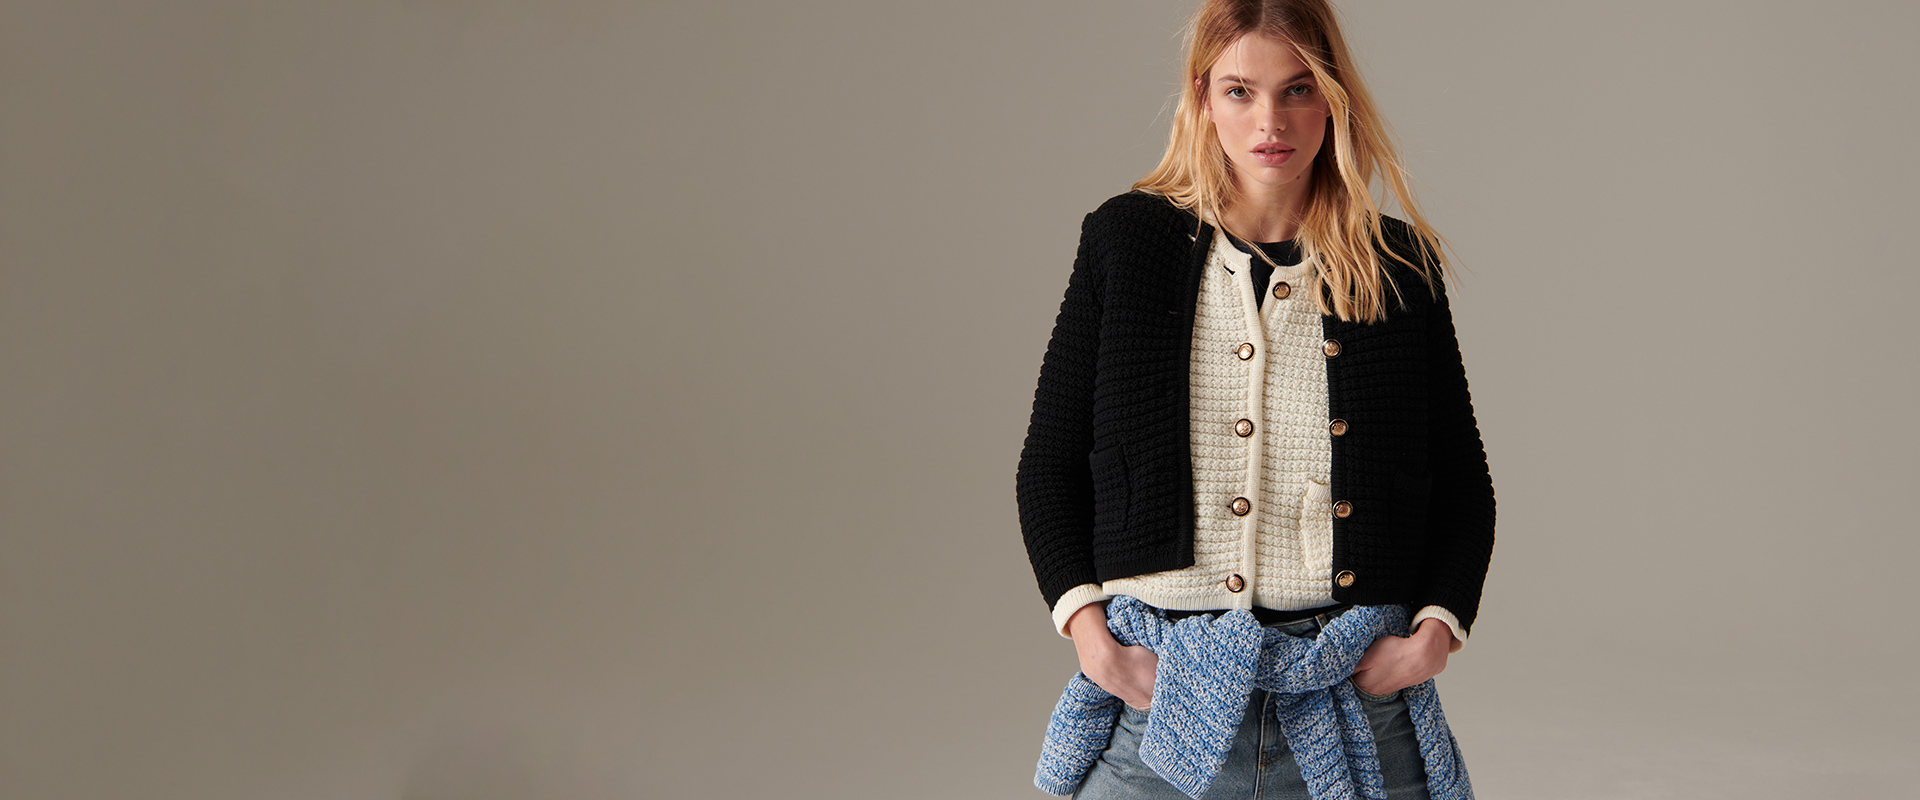 ba&sh gaspard cardigan, the must have knitted jacket